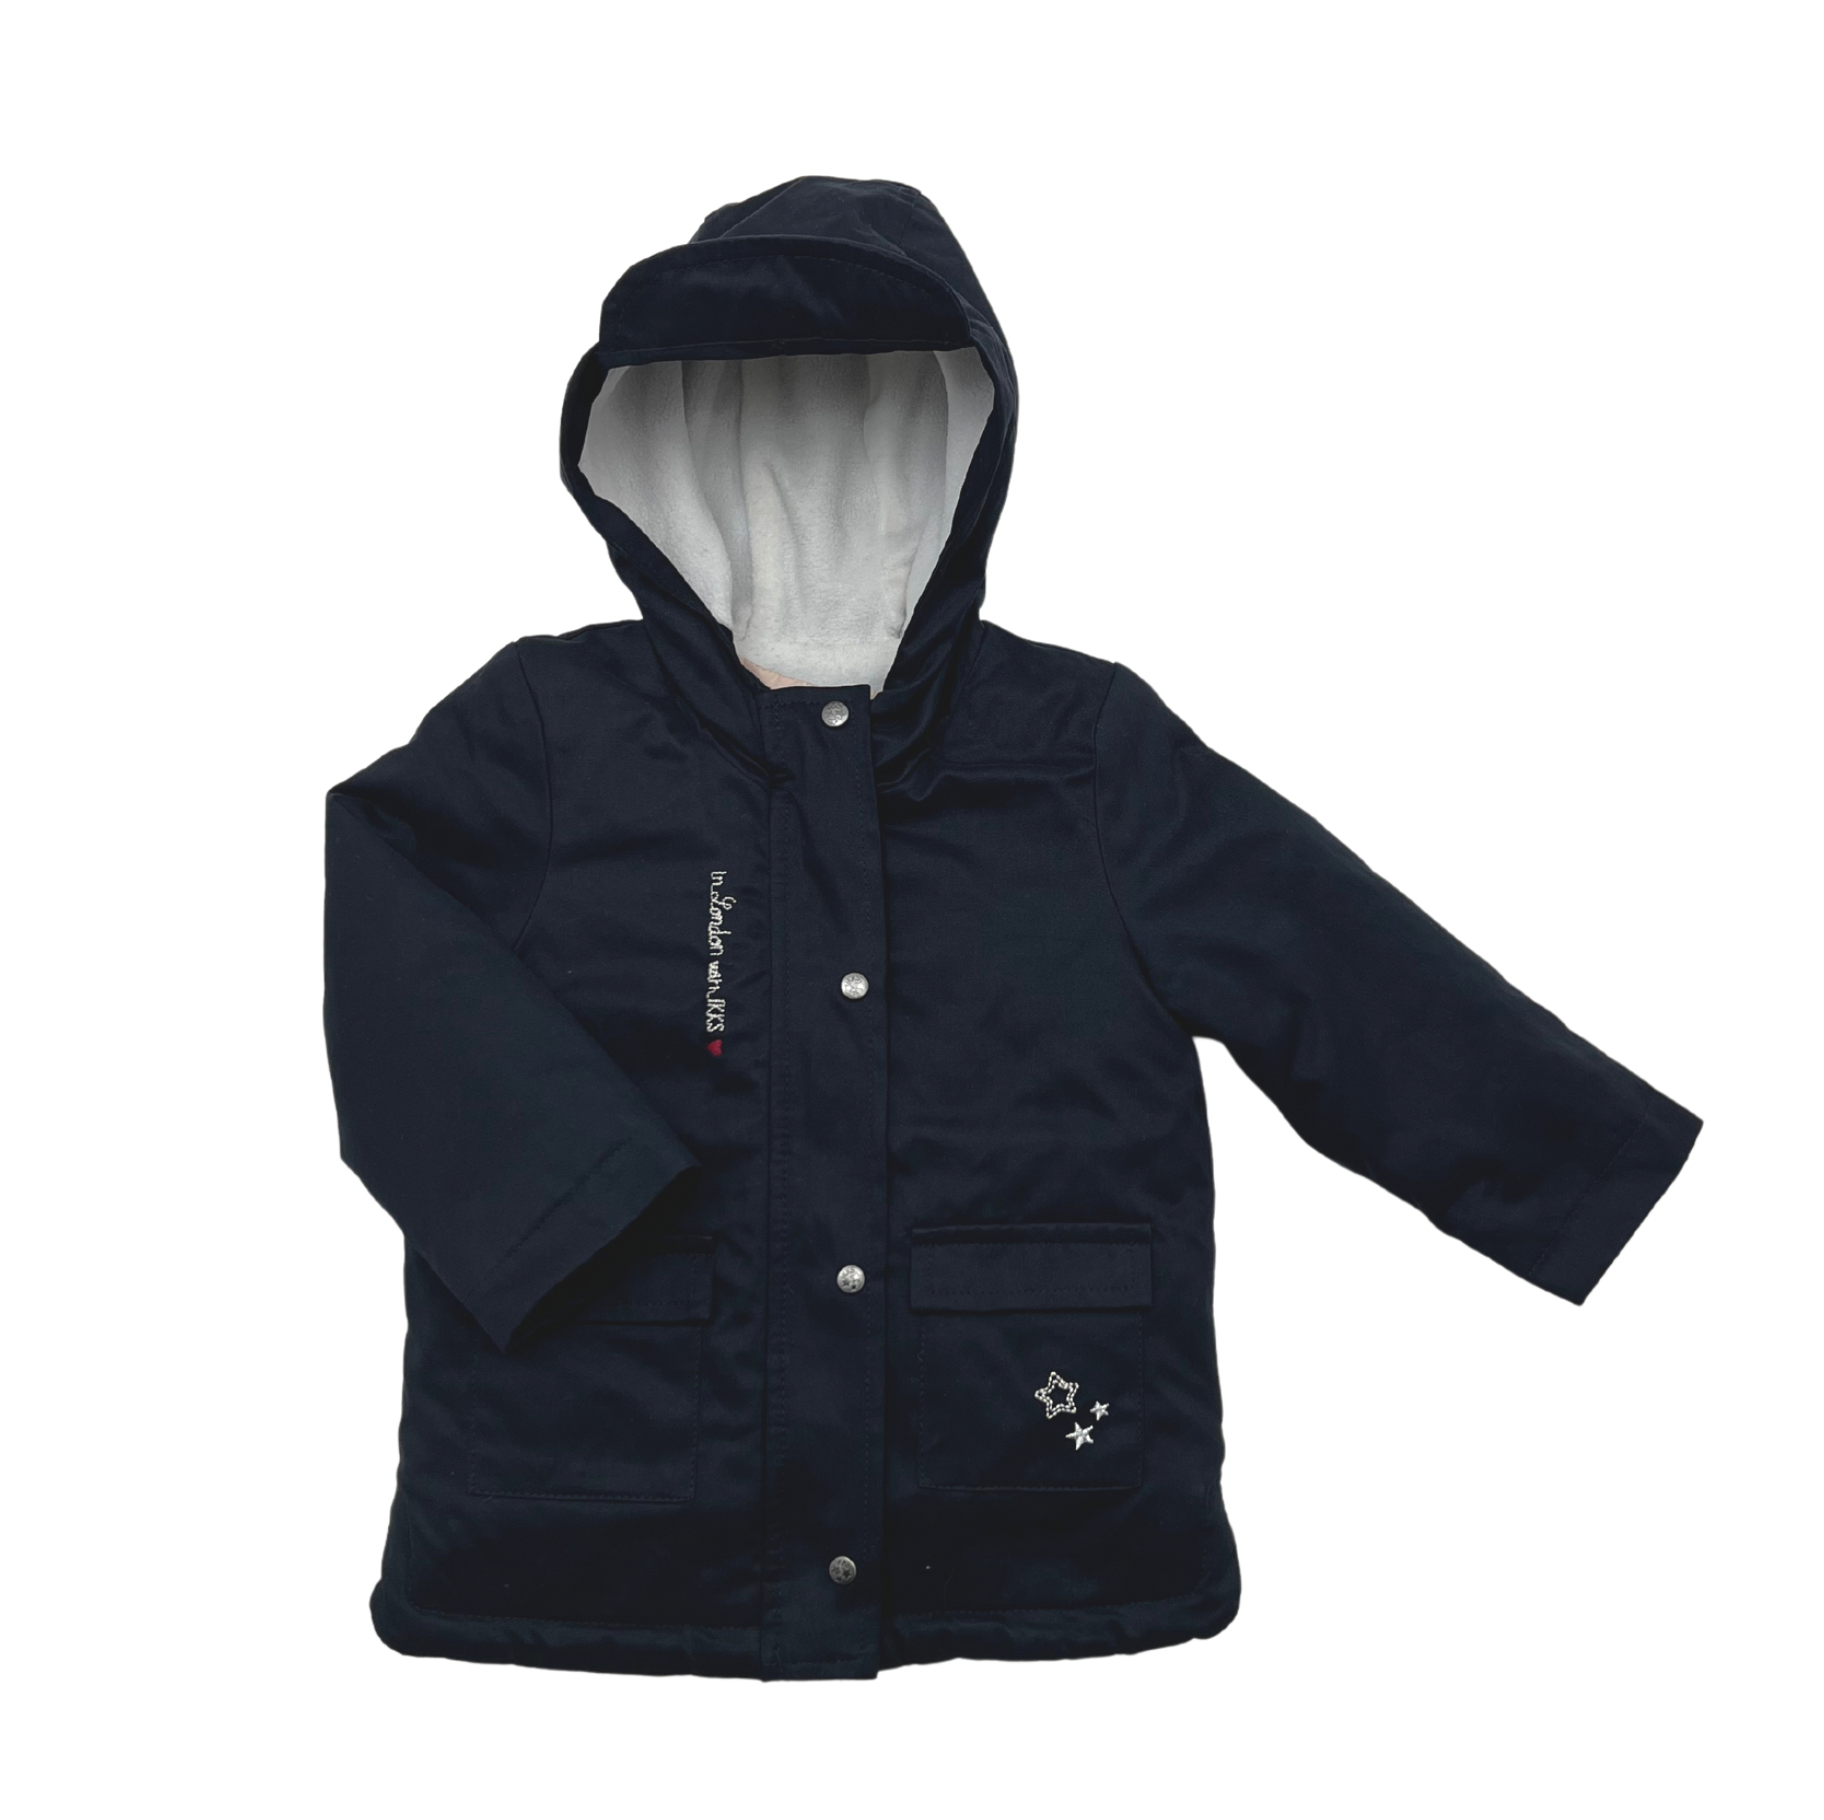 IKKS - Jacket with removable inner sleeveless down jacket - 1 year